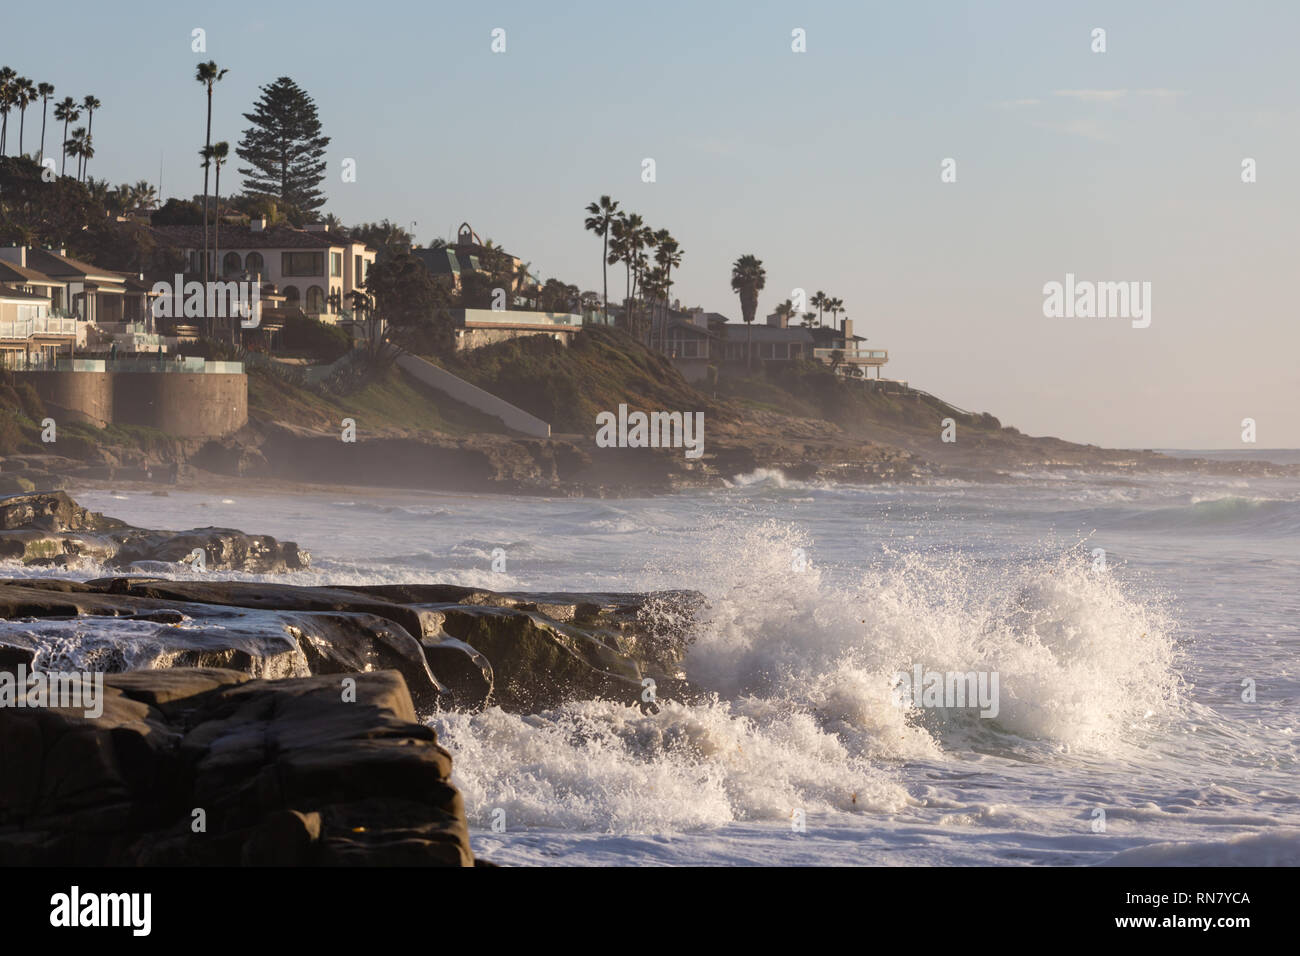 Waves Break At Rocks On The Windansea Beach With A View At Beach Houses In The Background In La Jolla San Diego California Stock Photo Alamy